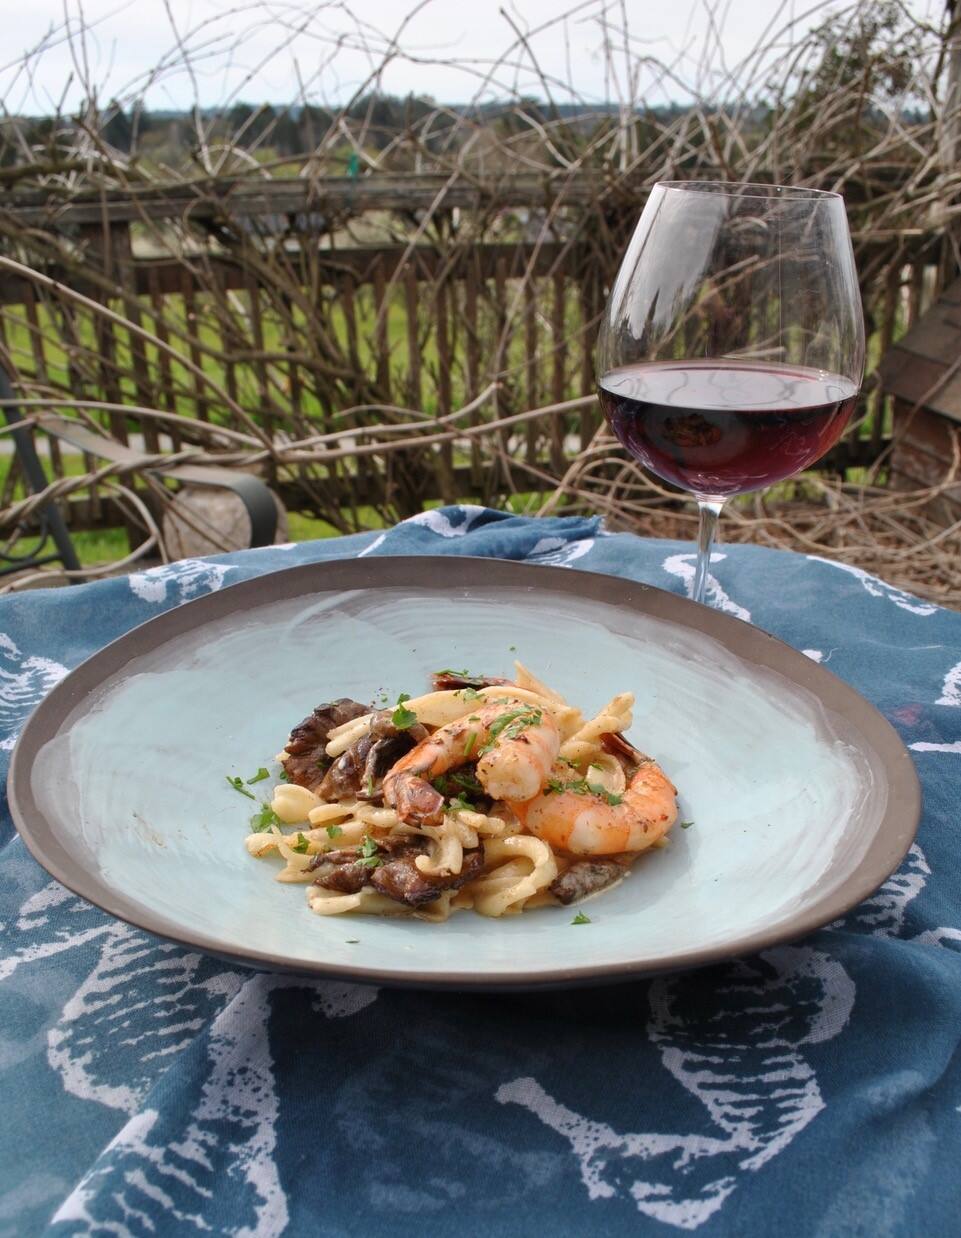 Black Chanterelles & Shrimp in Brown Butter with Pasta & Crème Fraiche makes a perfect pairing with our wine of the week, a pinot noir from Paul Mathew. (Gina Jordan)